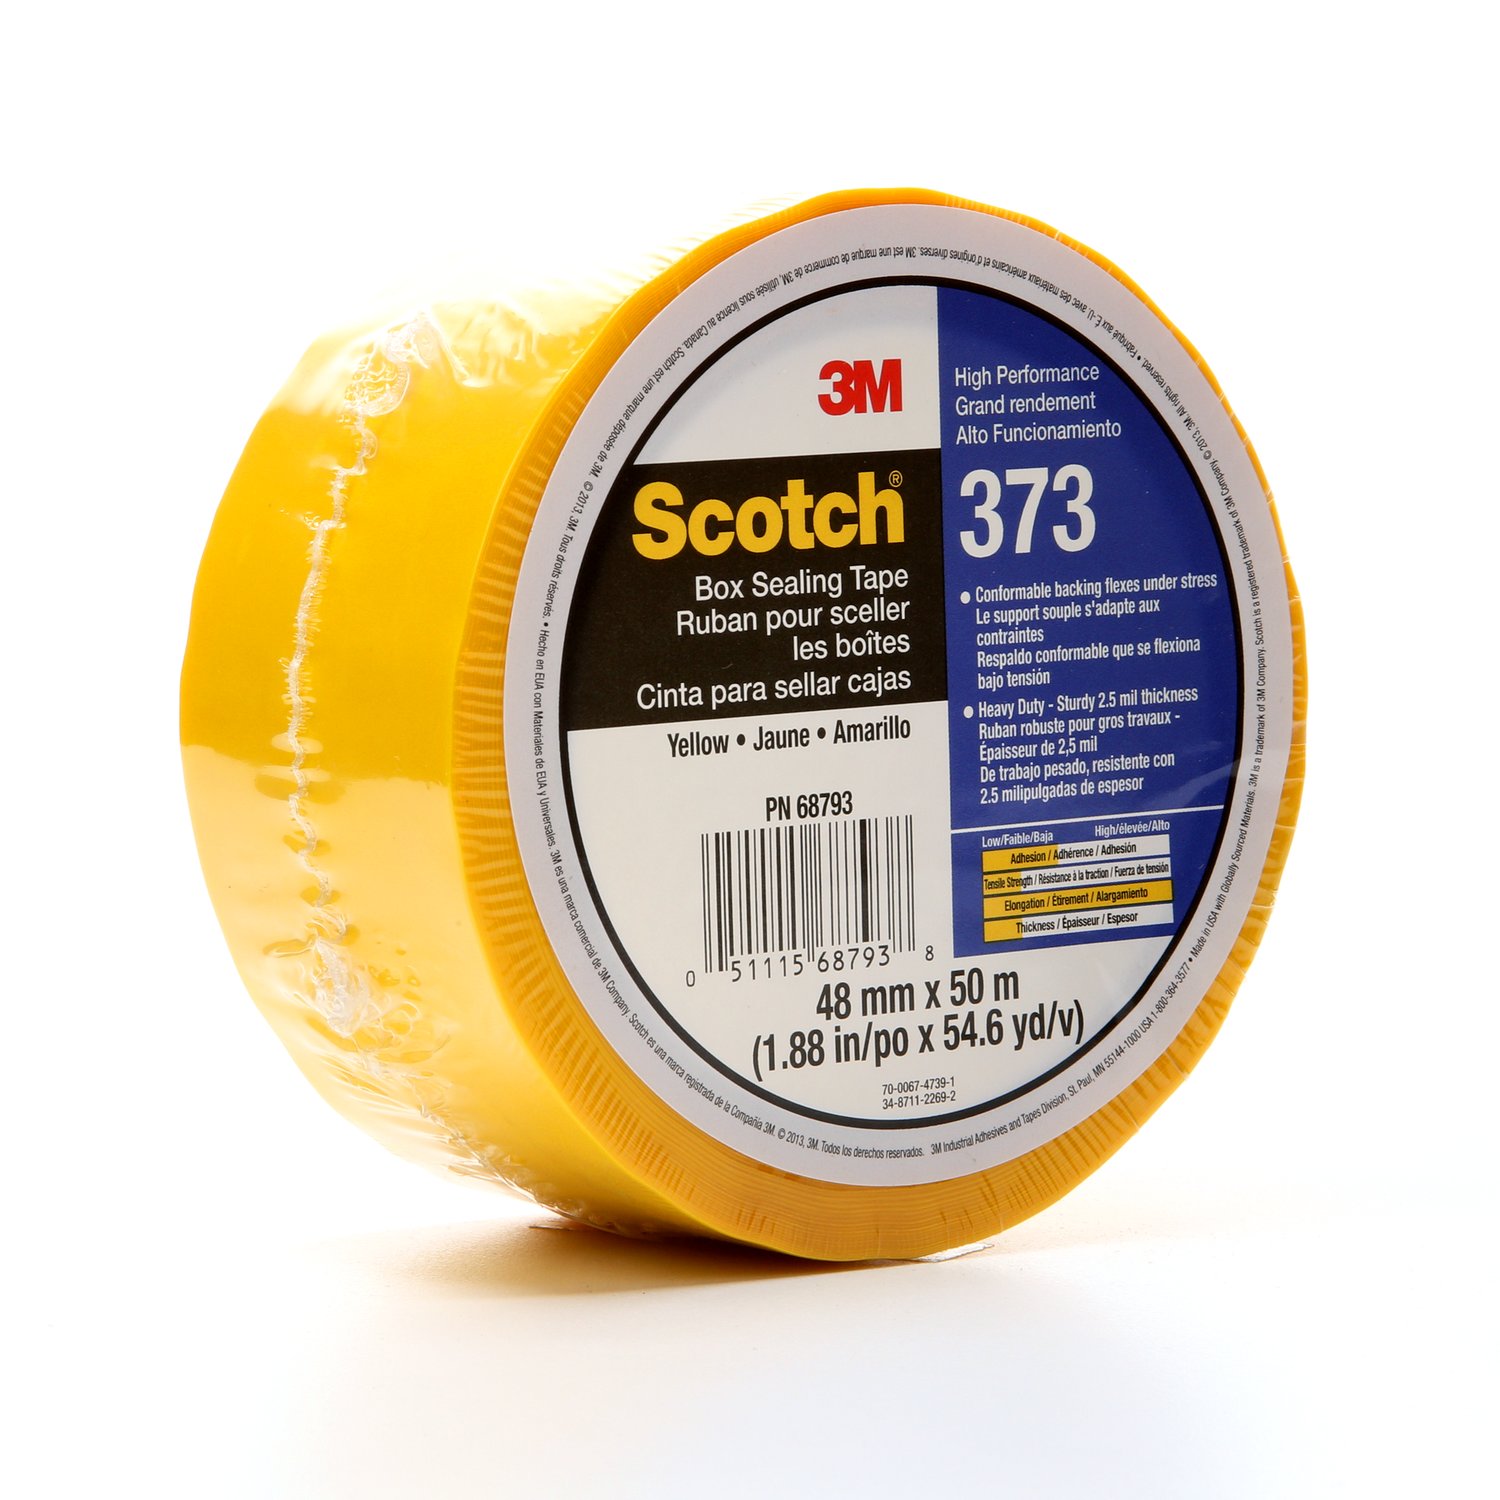 7010374969 - Scotch Box Sealing Tape 373, Yellow, 48 mm x 50 m, 36/Case,
Individually Wrapped Conveniently Packaged